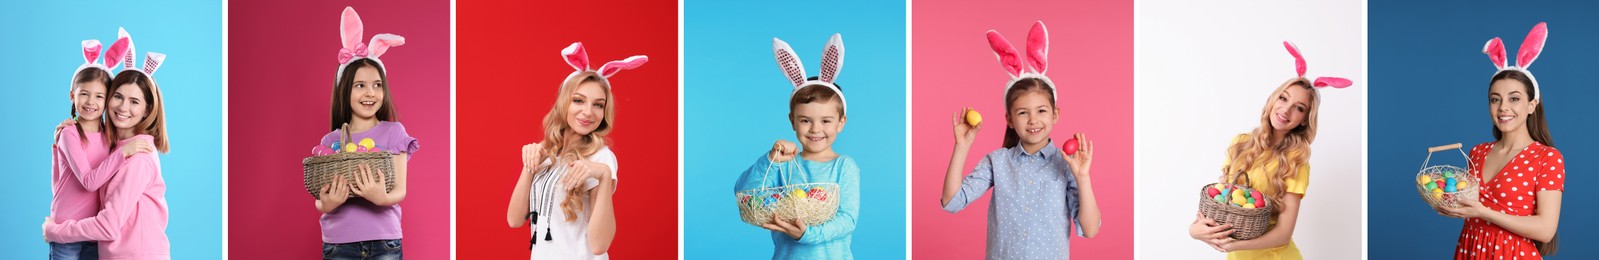 Image of Collage photos of people wearing bunny ears headbands on different color backgrounds, banner design. Happy Easter